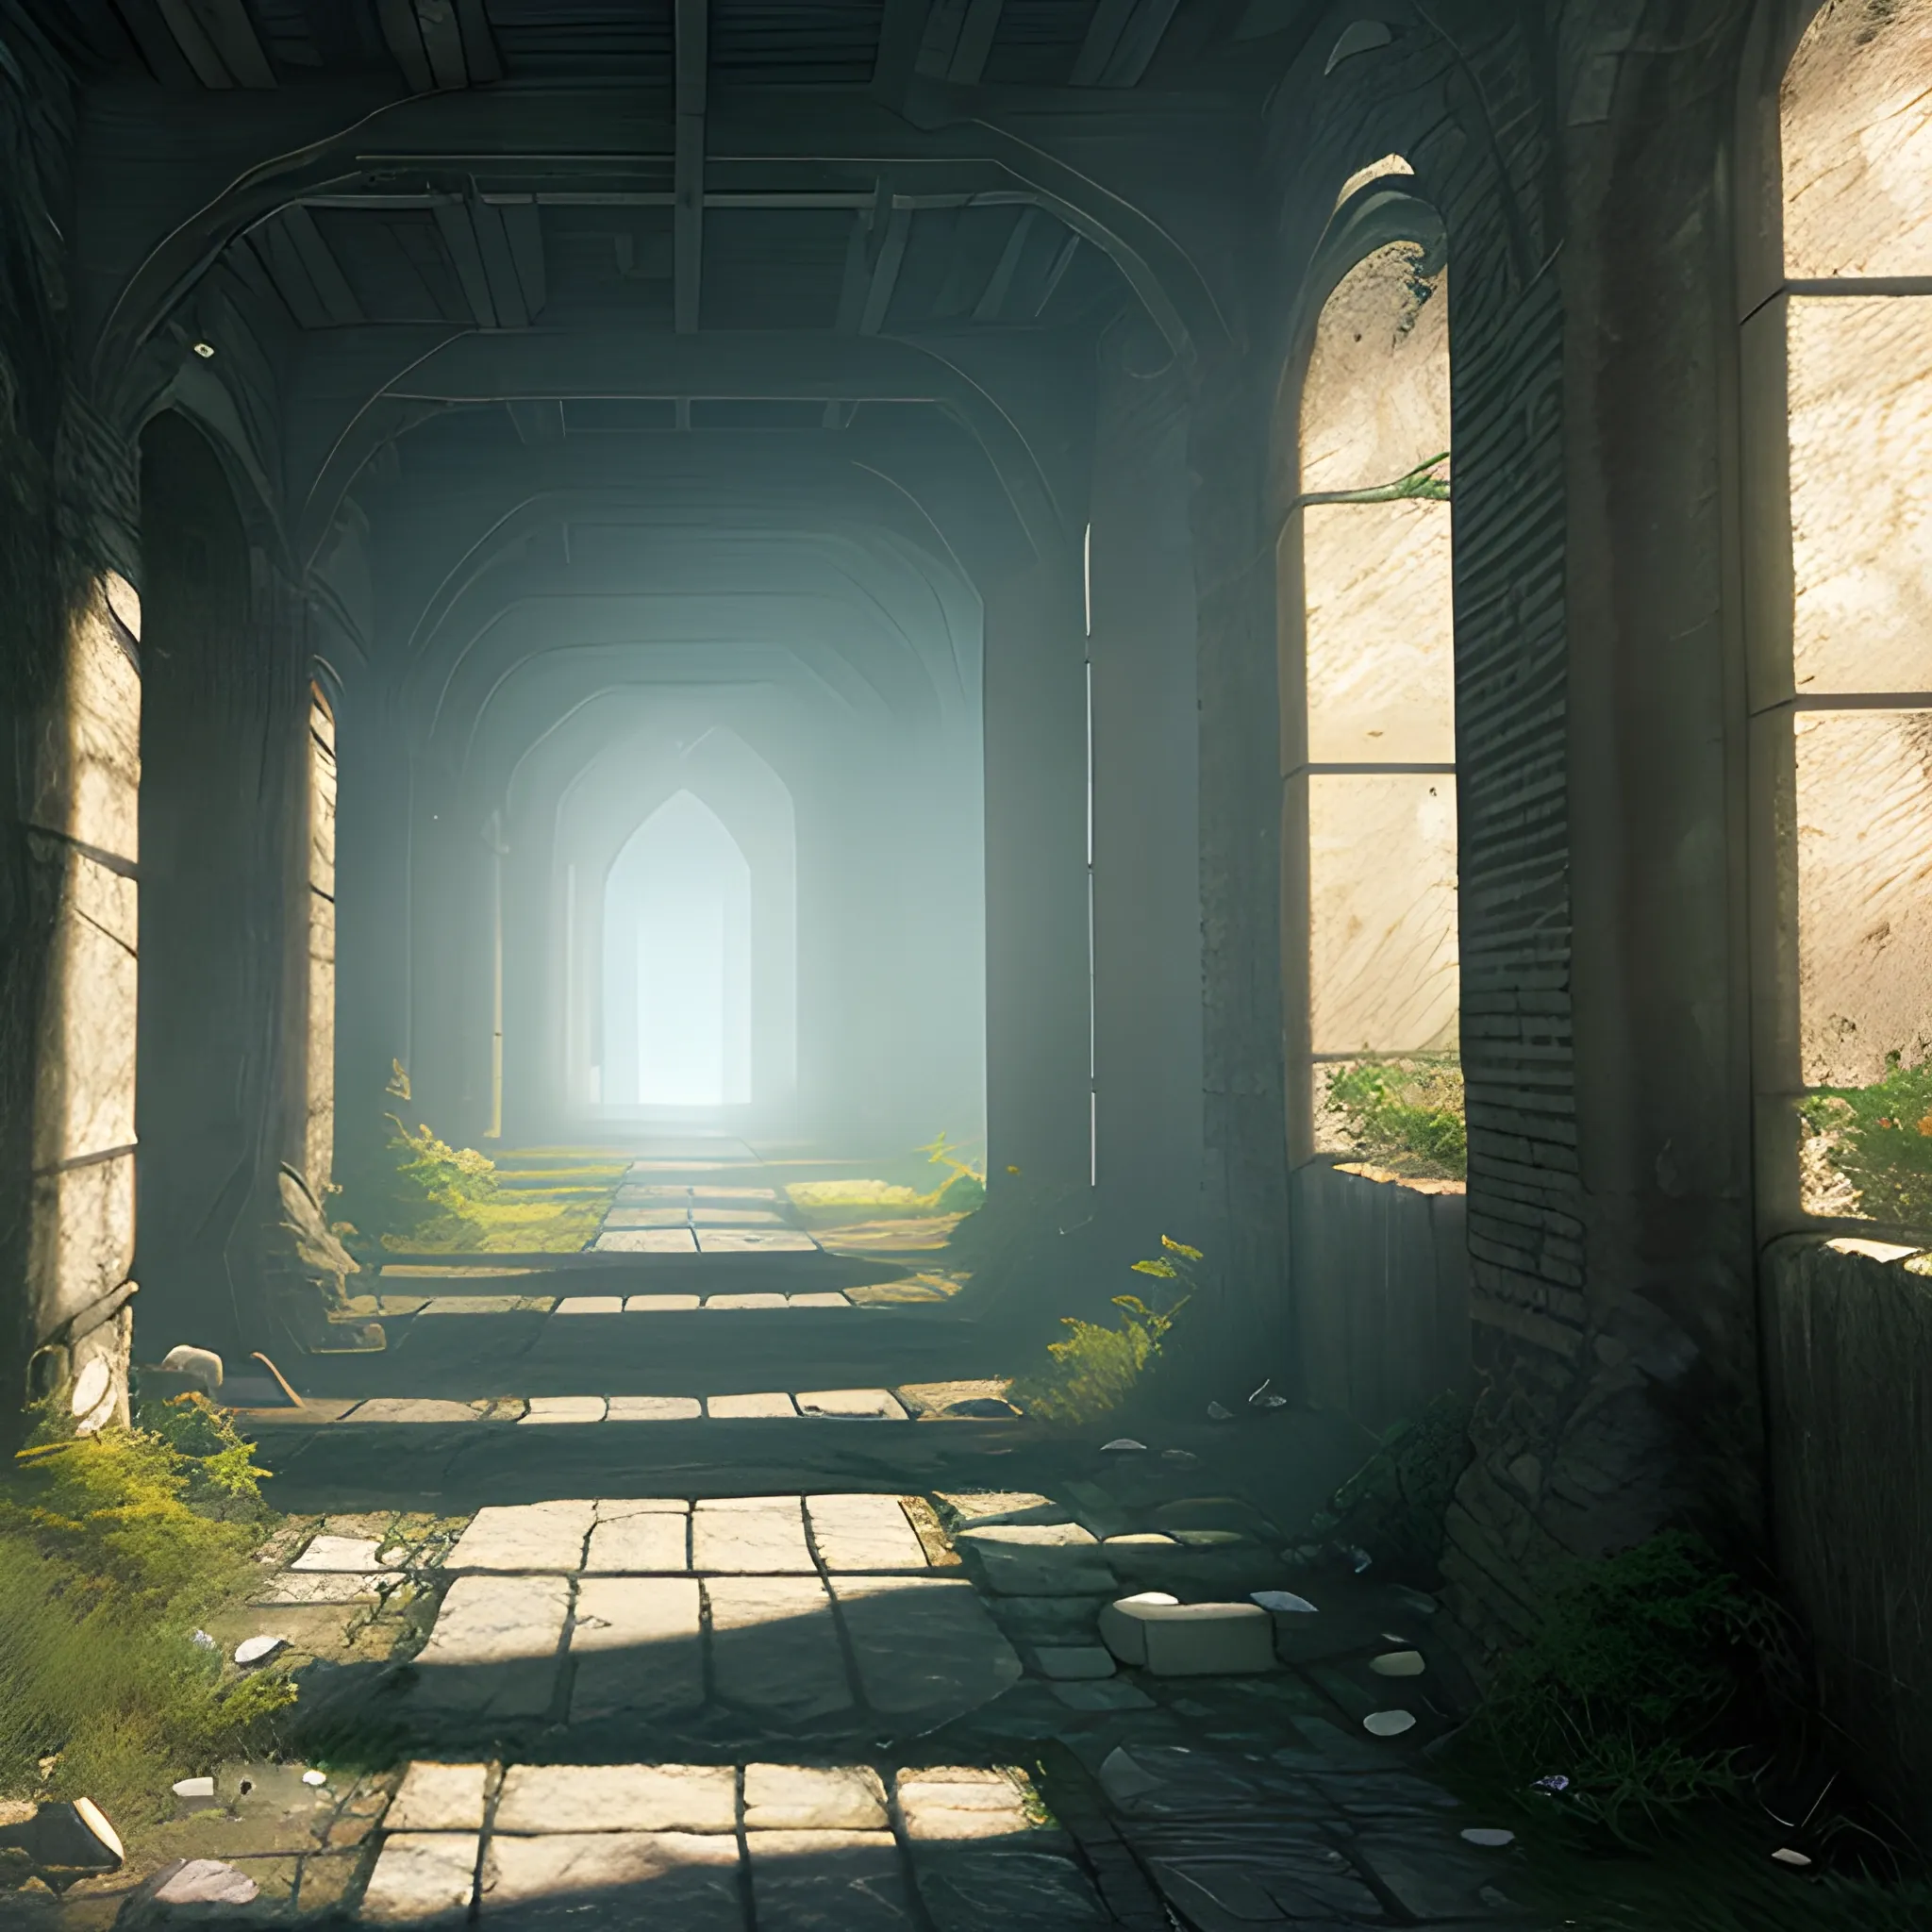 "Wandering Soul," "Ancient Pathway," "Mystical Illumination," "Sunlight Filtering Through Debris," "3D Style, Cinematic Realism"
"width": 960, "height": 540, "seed": "566136464", step:"60", "version": "SH_Deliberate"